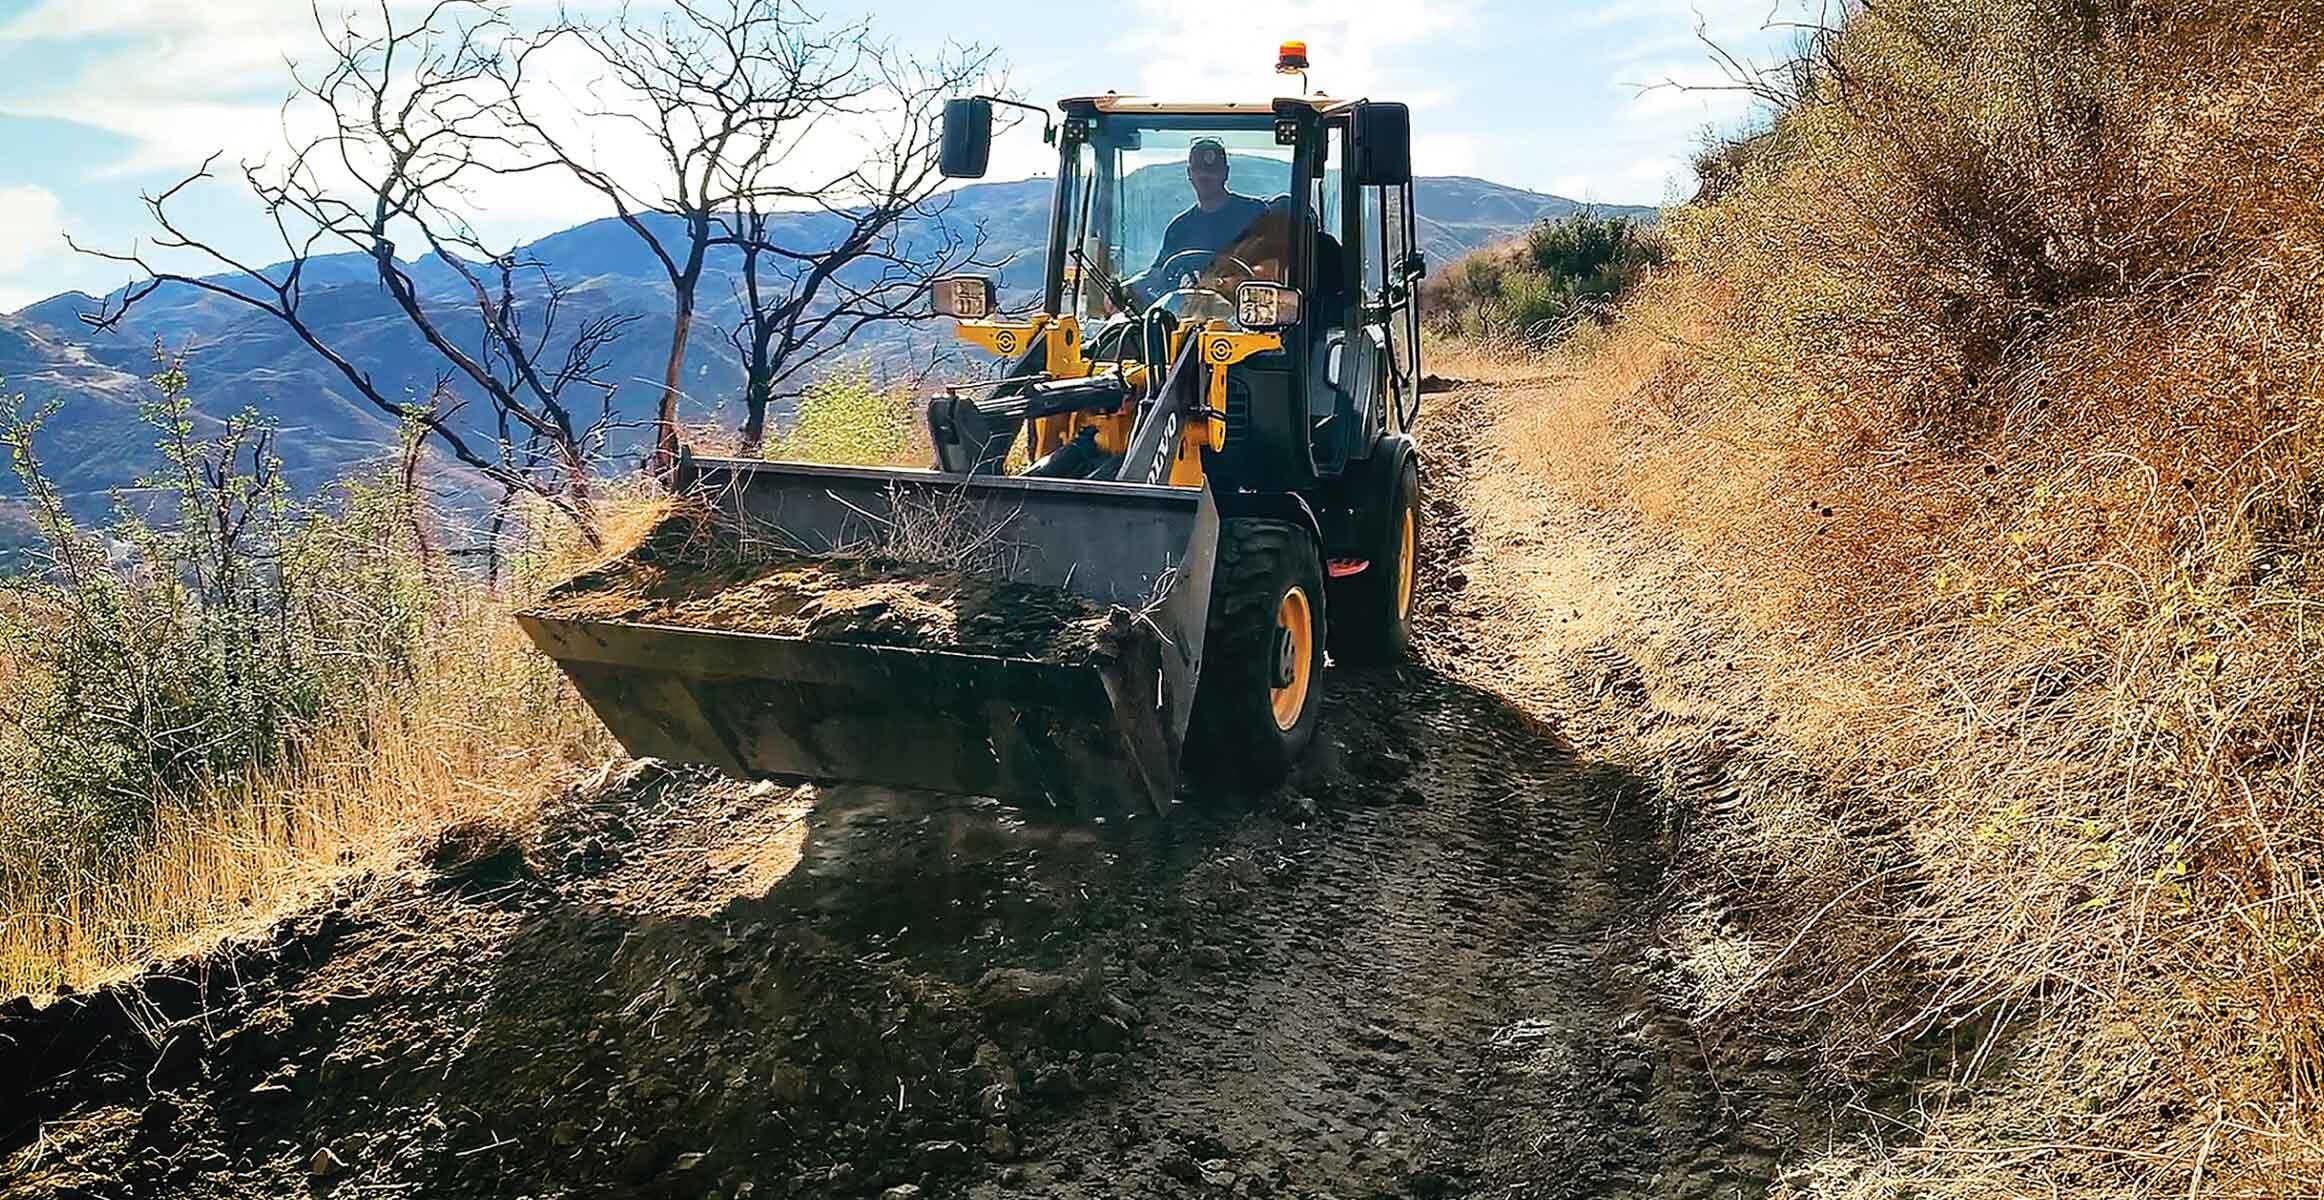 The L25 Electric is comfortable working in rugged and remote conditions.